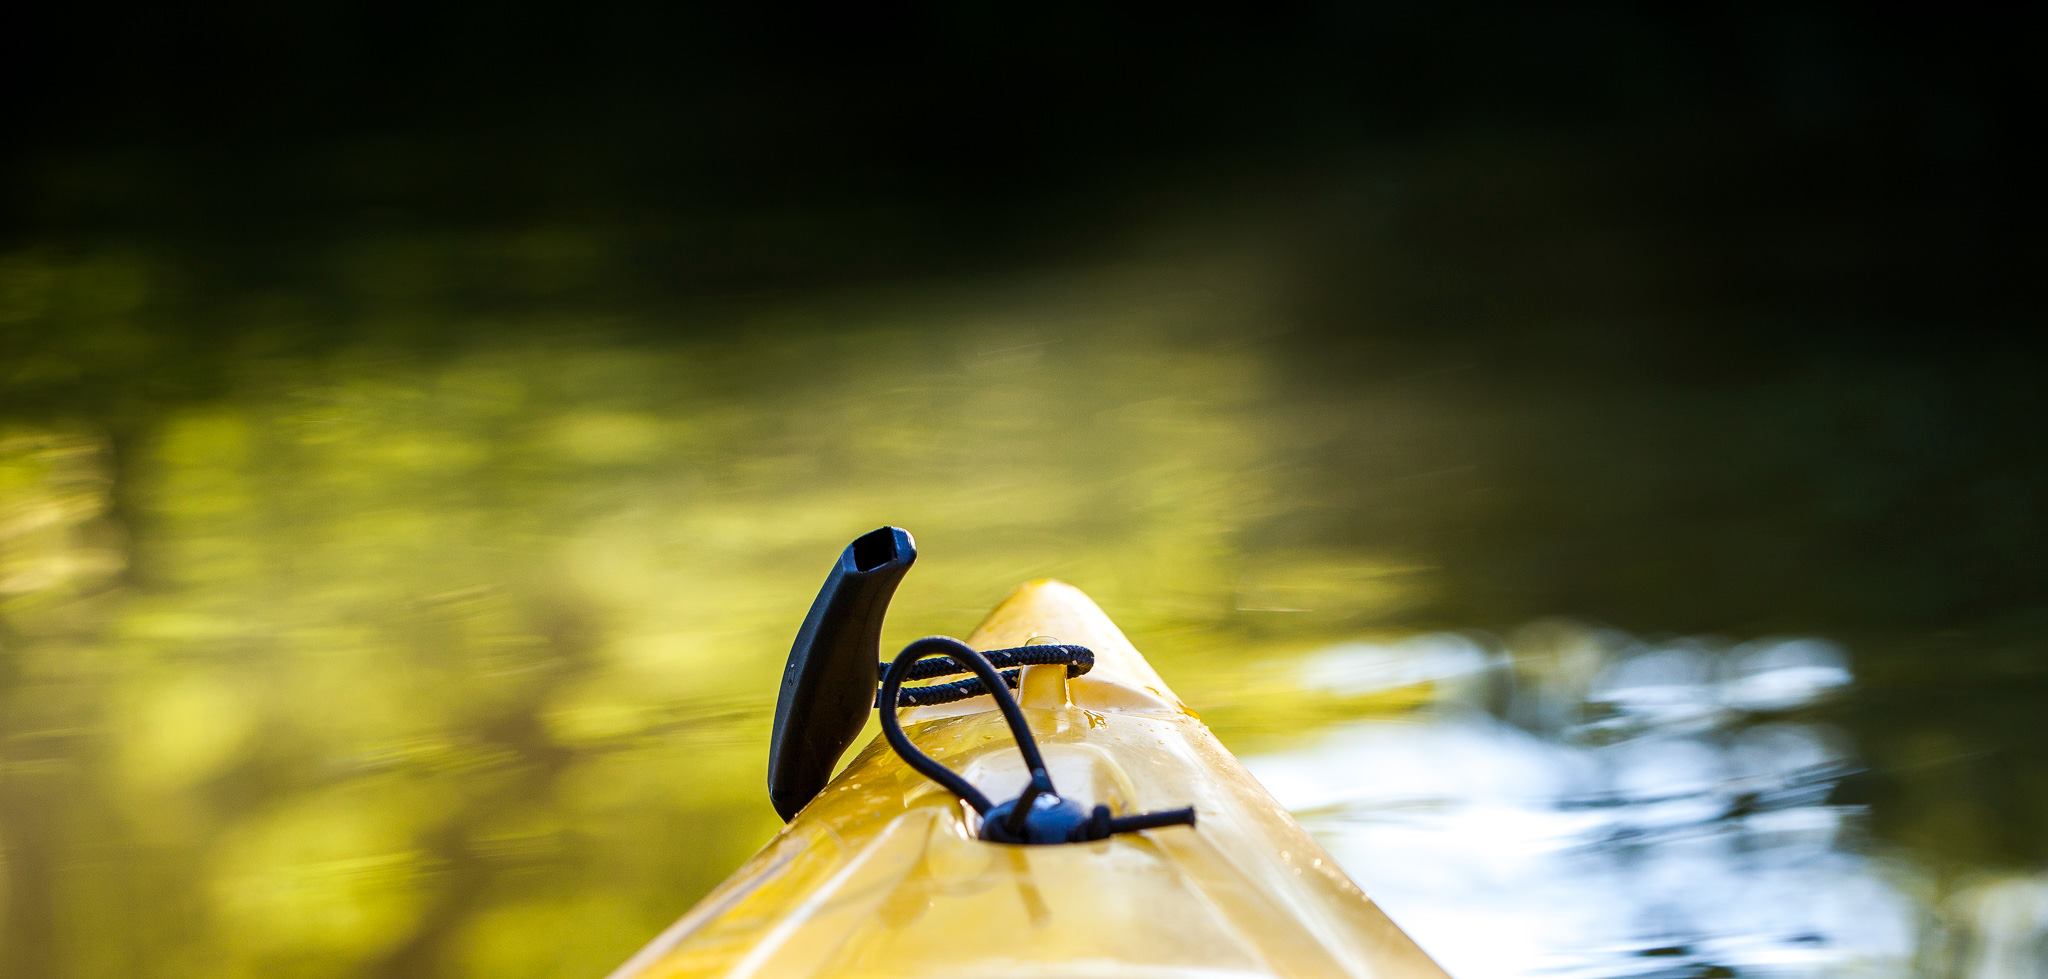 Kayak photography gear: what to bring with you?